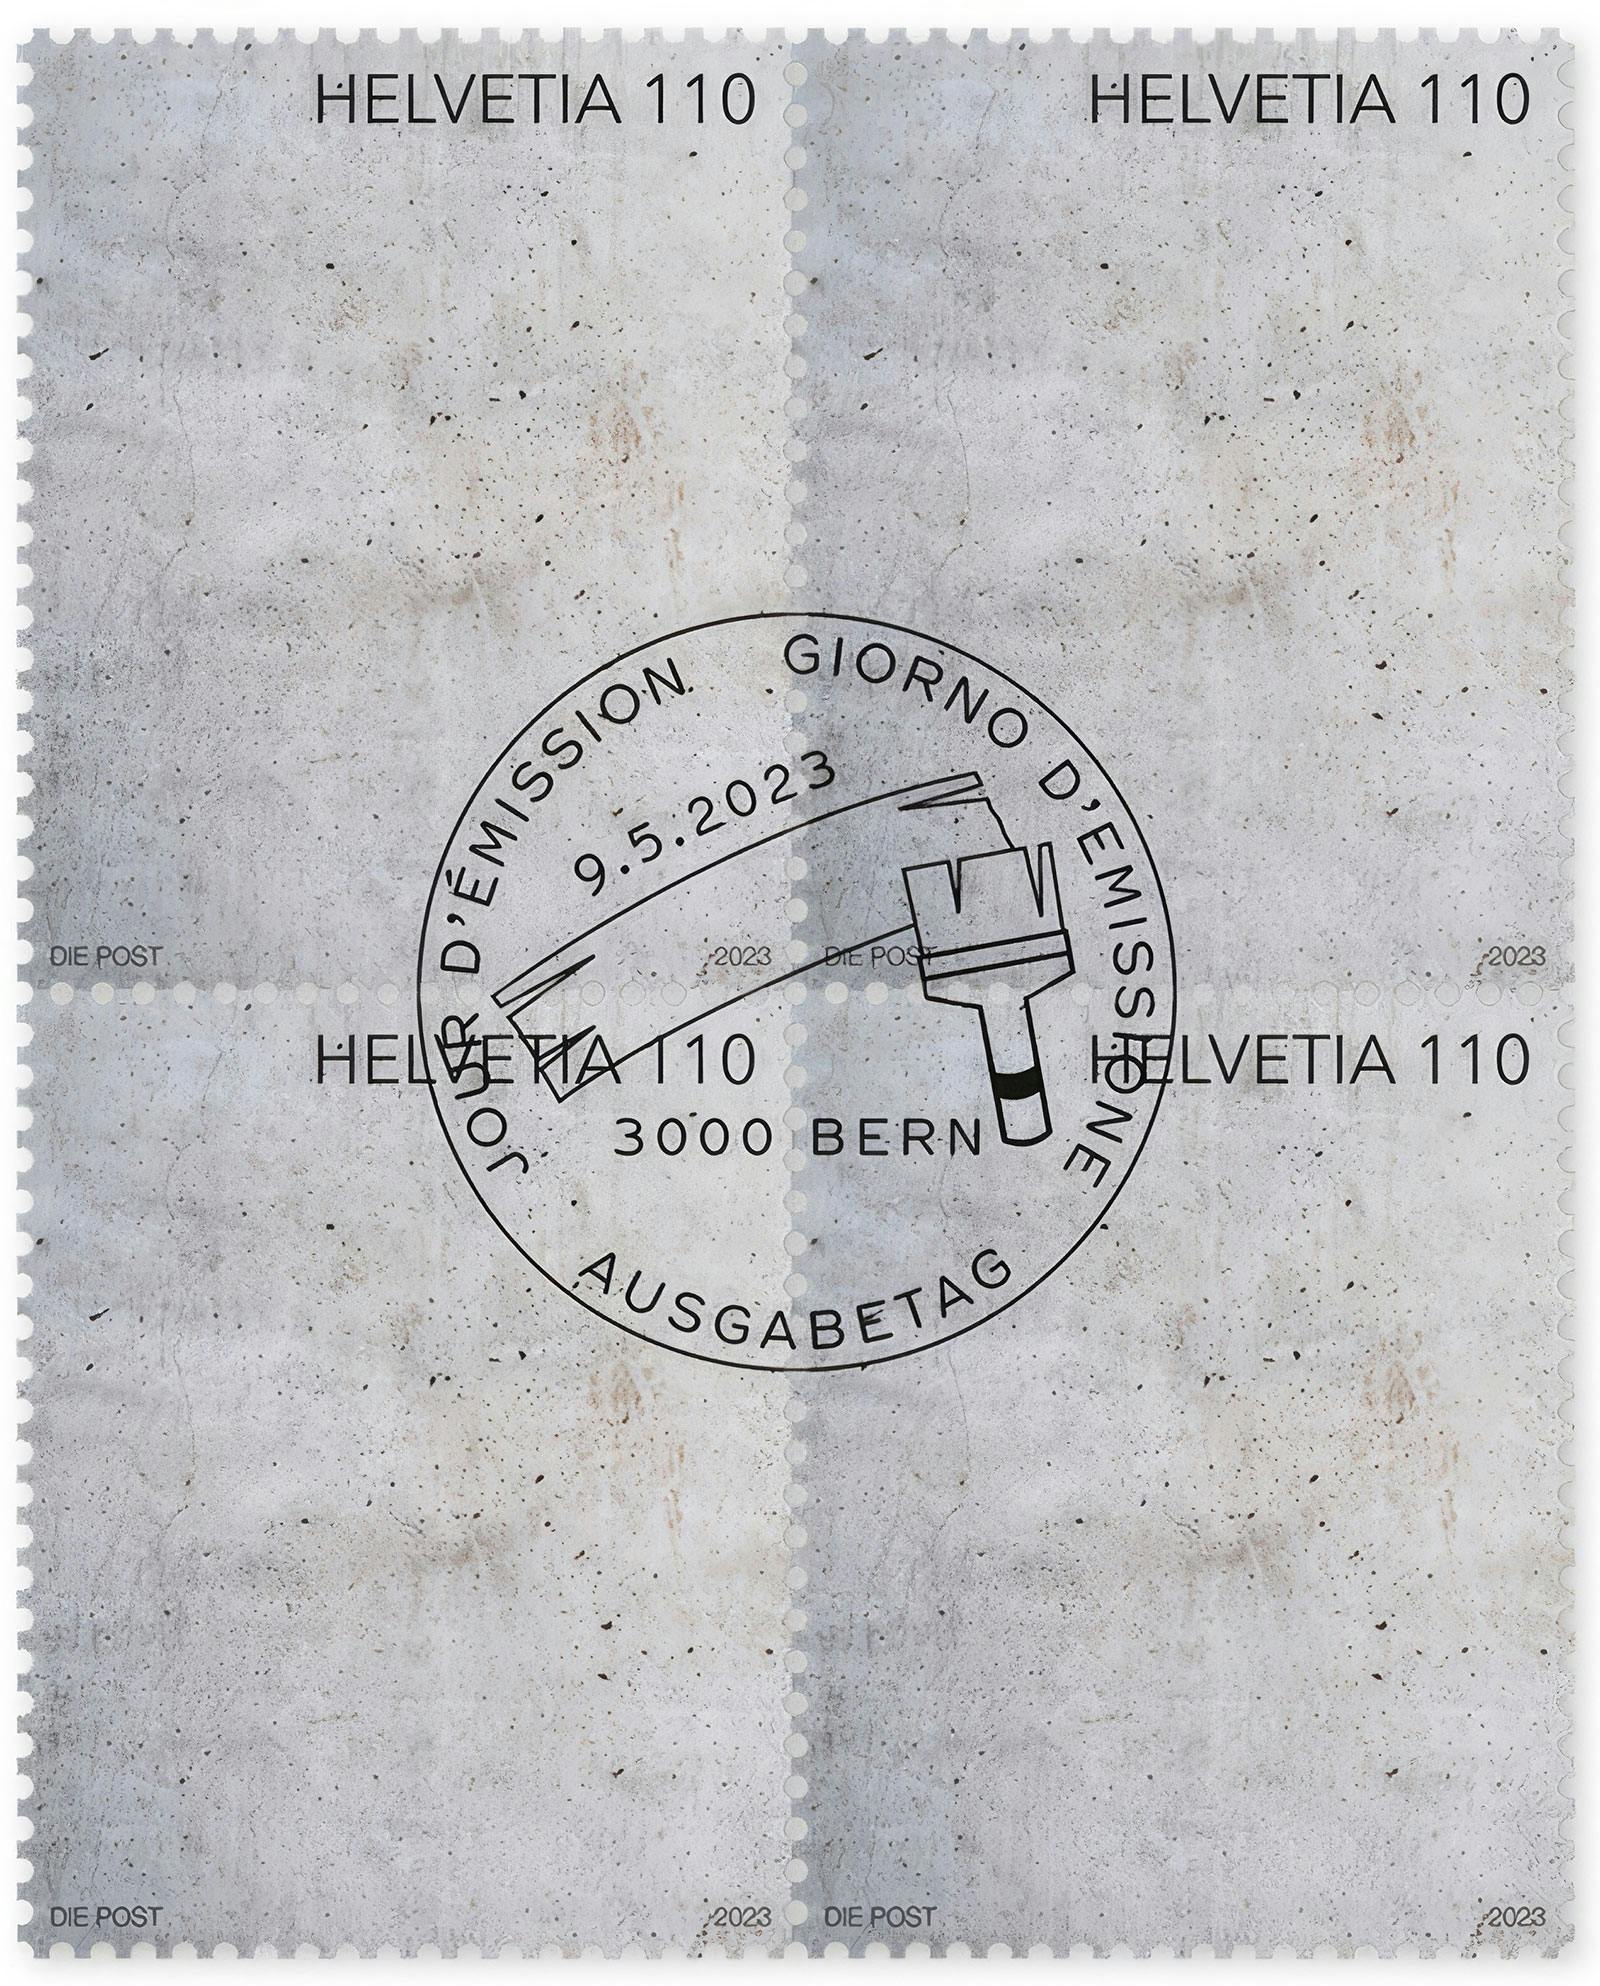 Switzerland releases postal stamp honoring concrete architecture, News